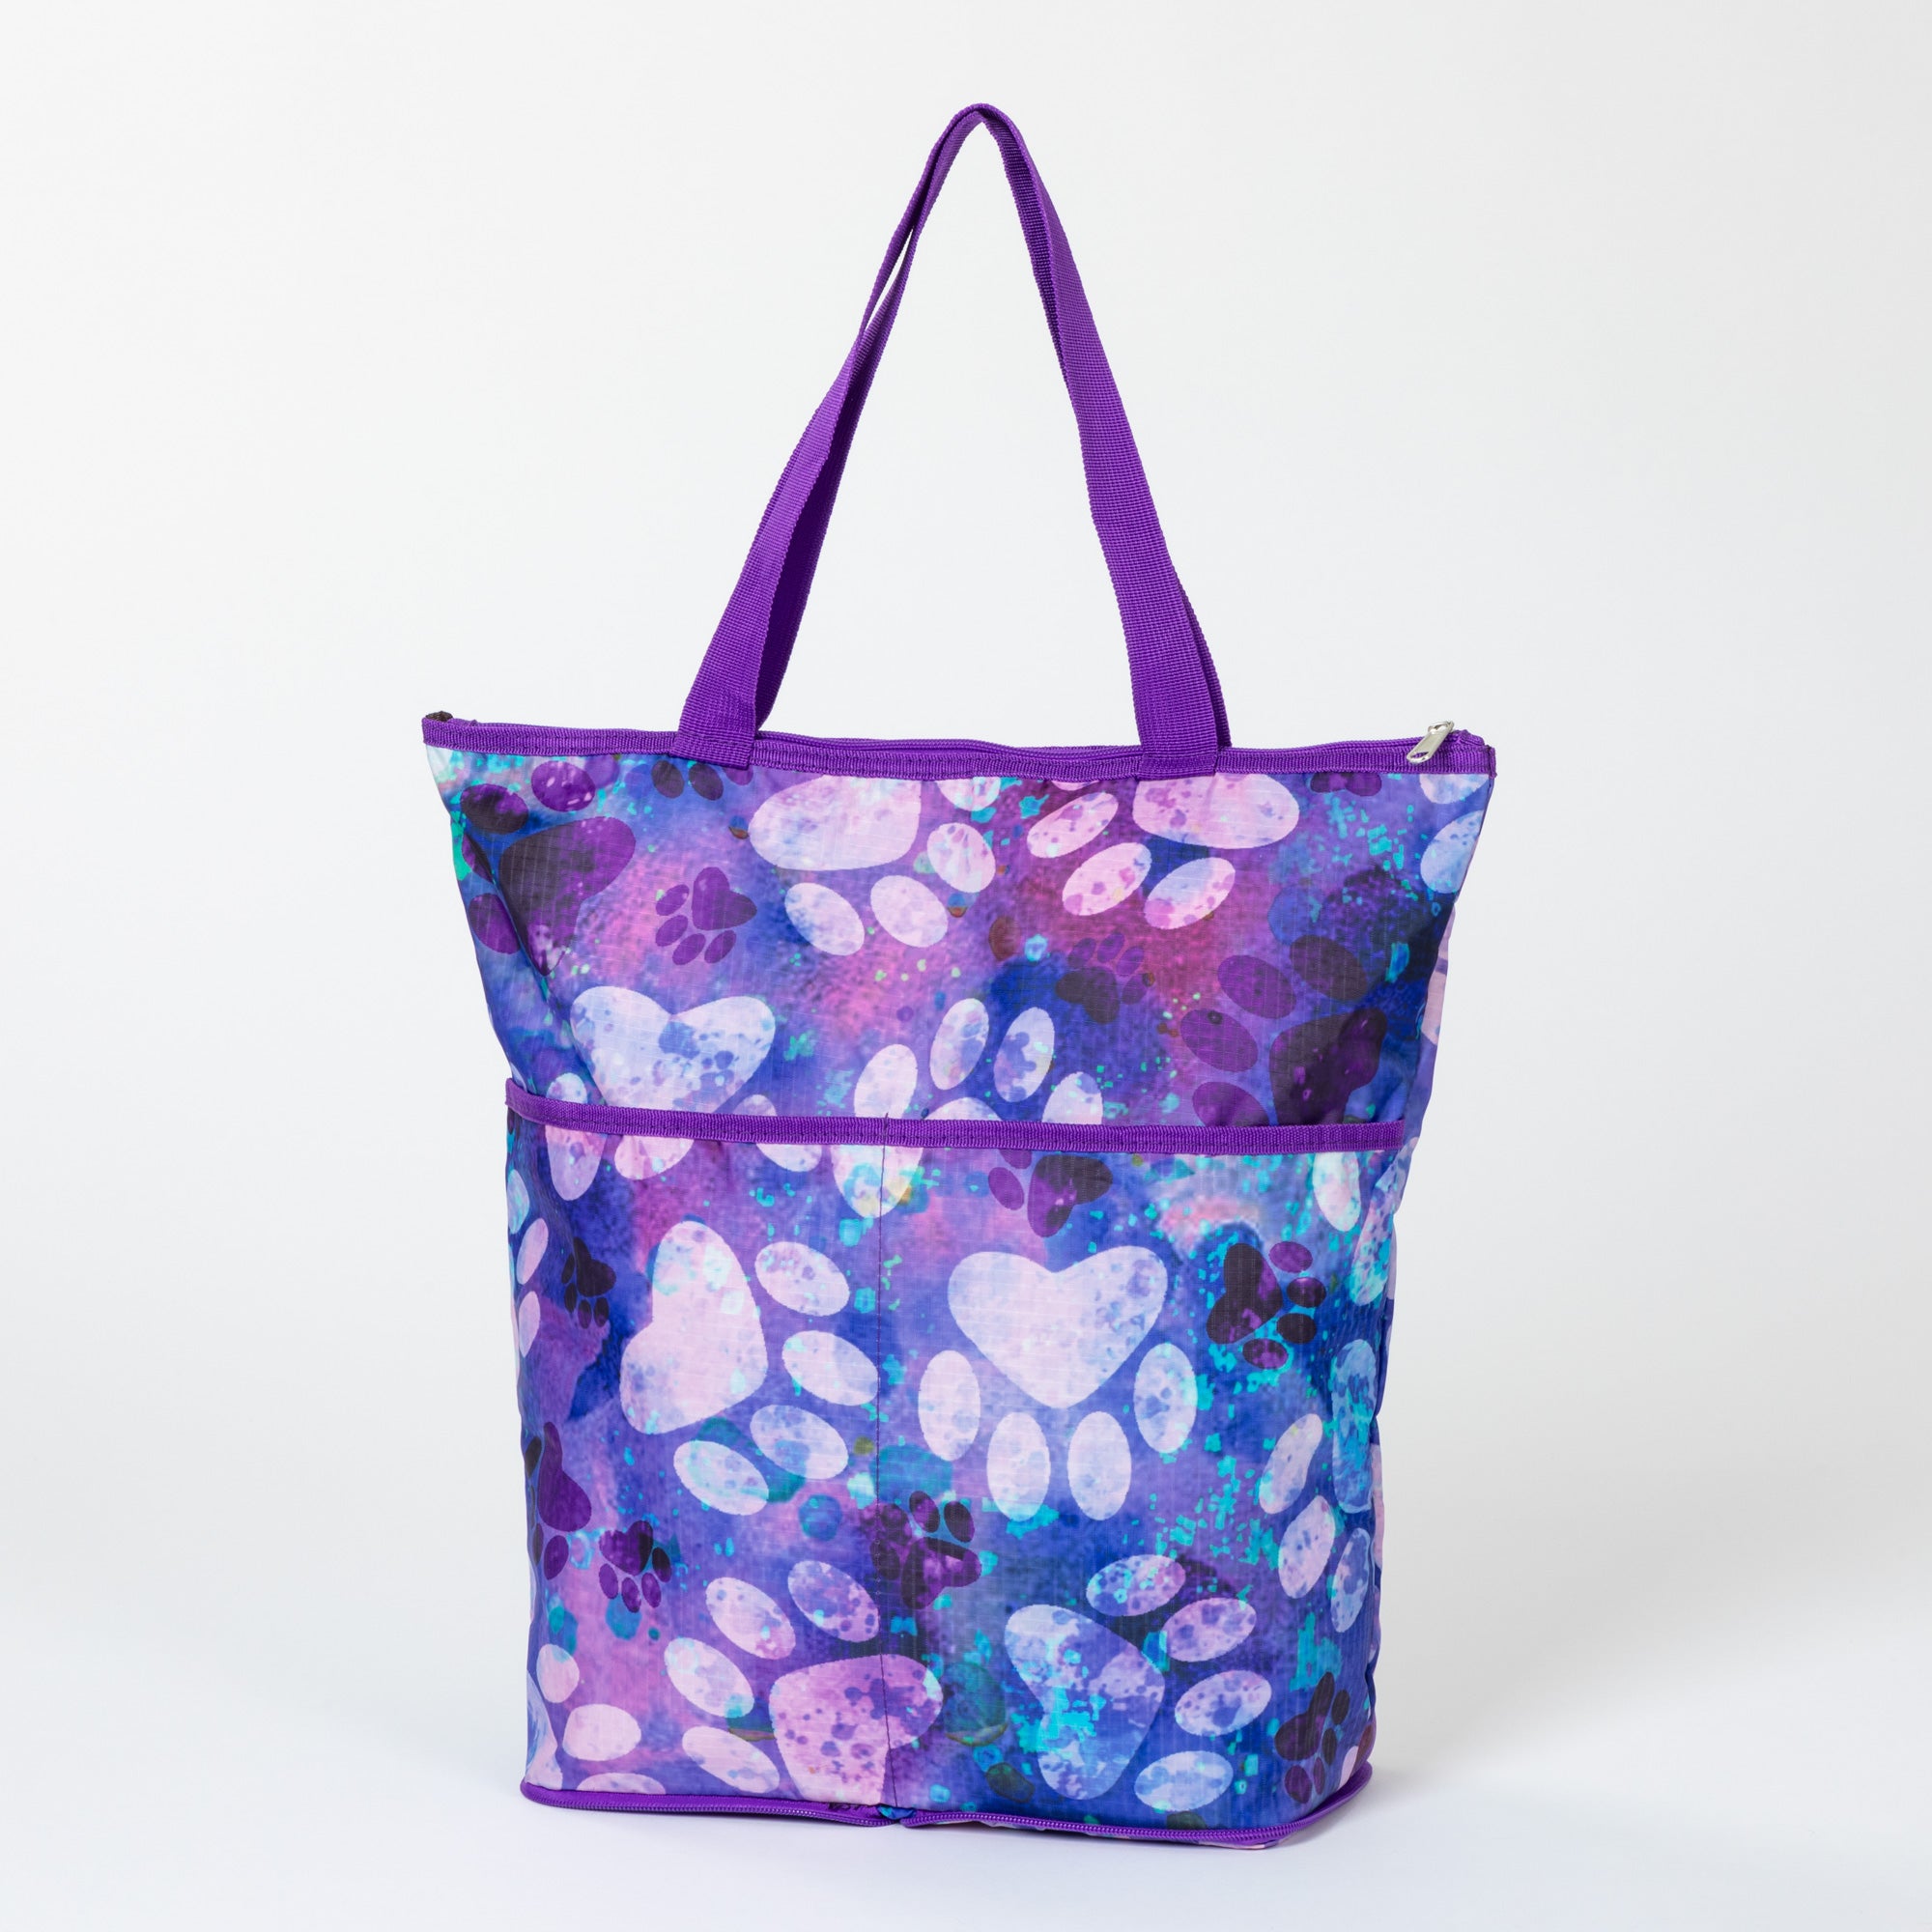 Extra Large Foldable Paw Print Tote Bag - Reflection Paws